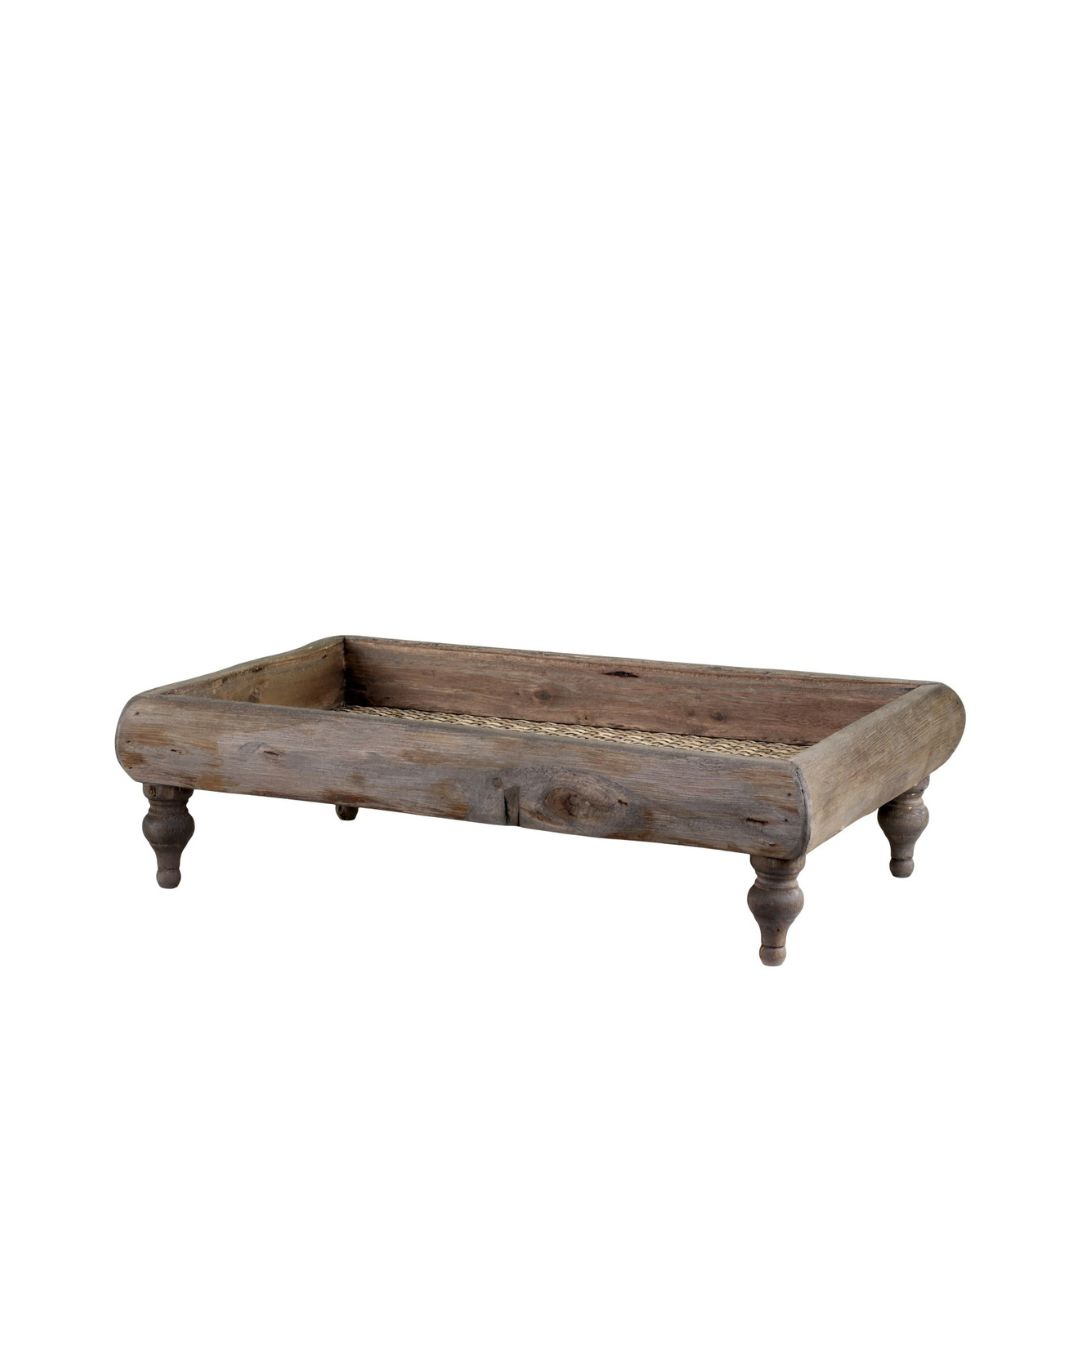 Raised Wooden Tray - Small